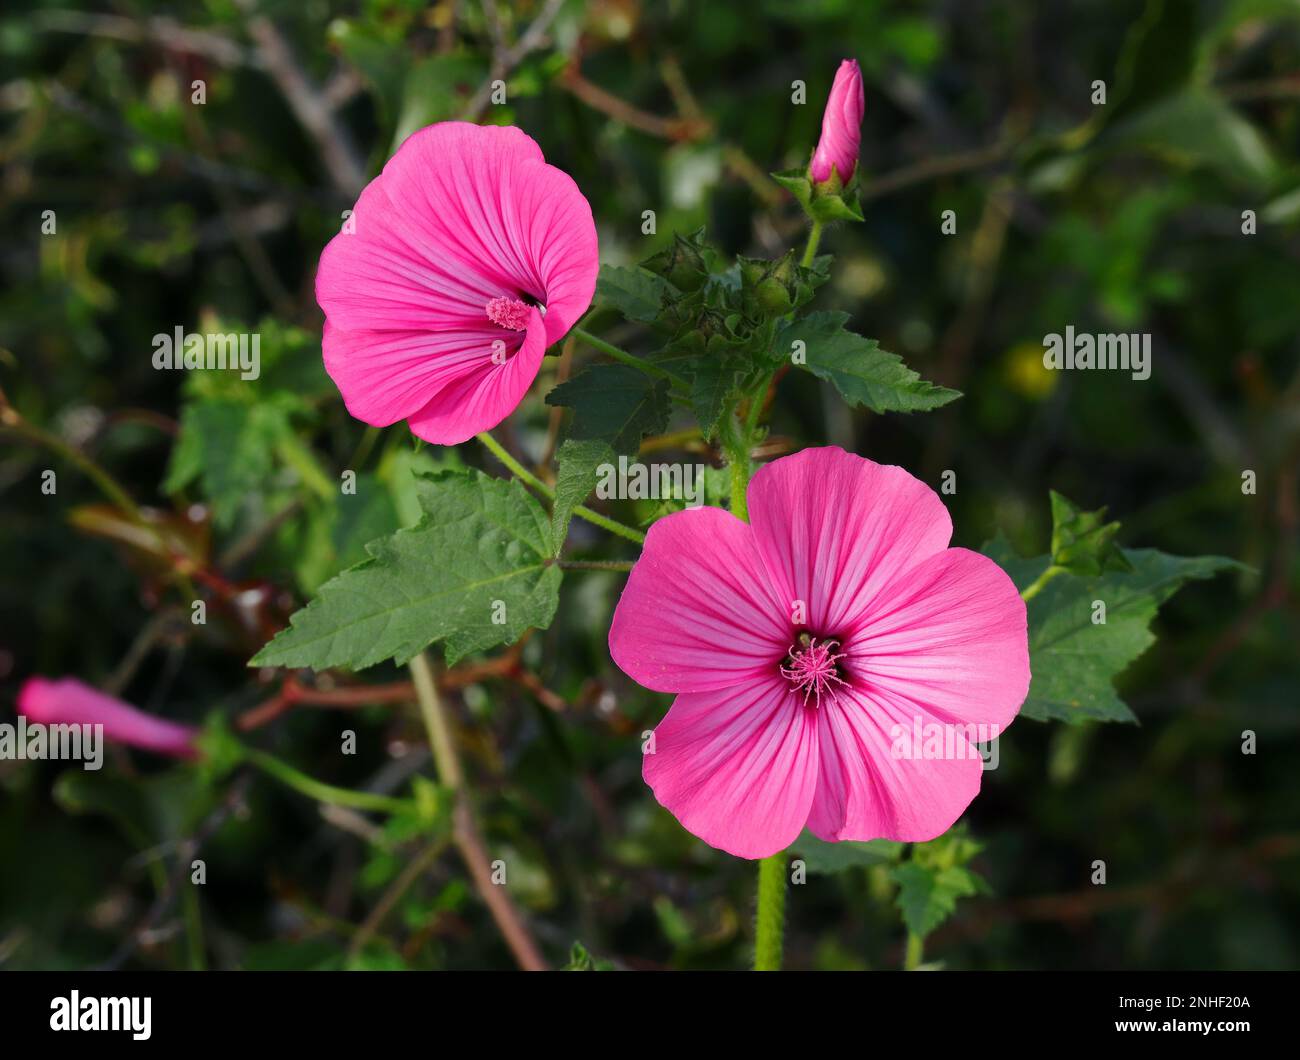 Spring, Portugal. Annual Mallows also known as Rose Mallow or Royal Mallow. Lavatera rosa in full bloom in natural surroundings. Malvaceae Family. Stock Photo